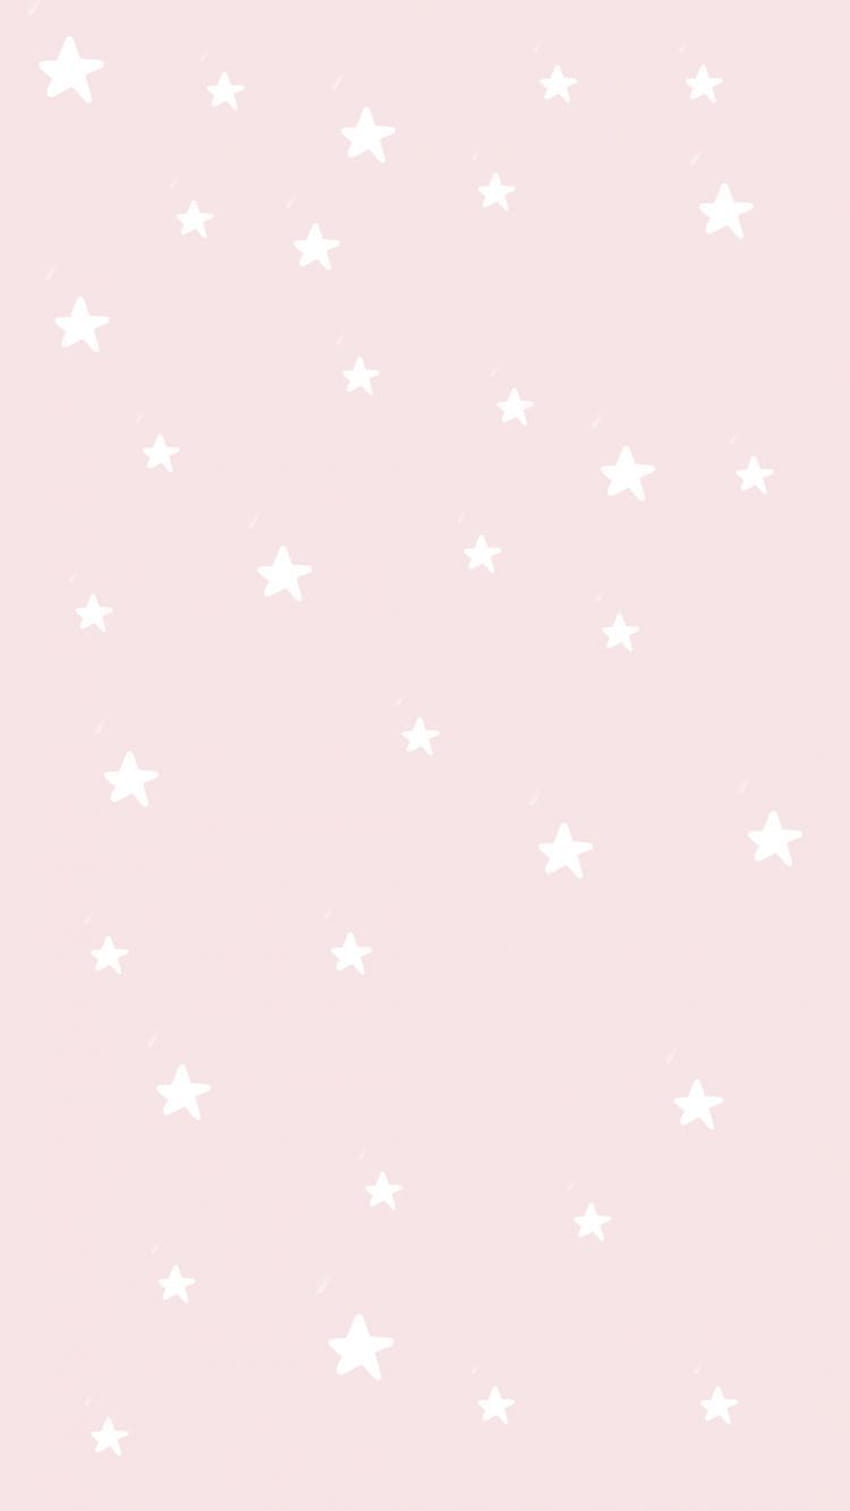 Light Pink With White Stars Phone Backgrounds, preppy aesthetic pink HD ...